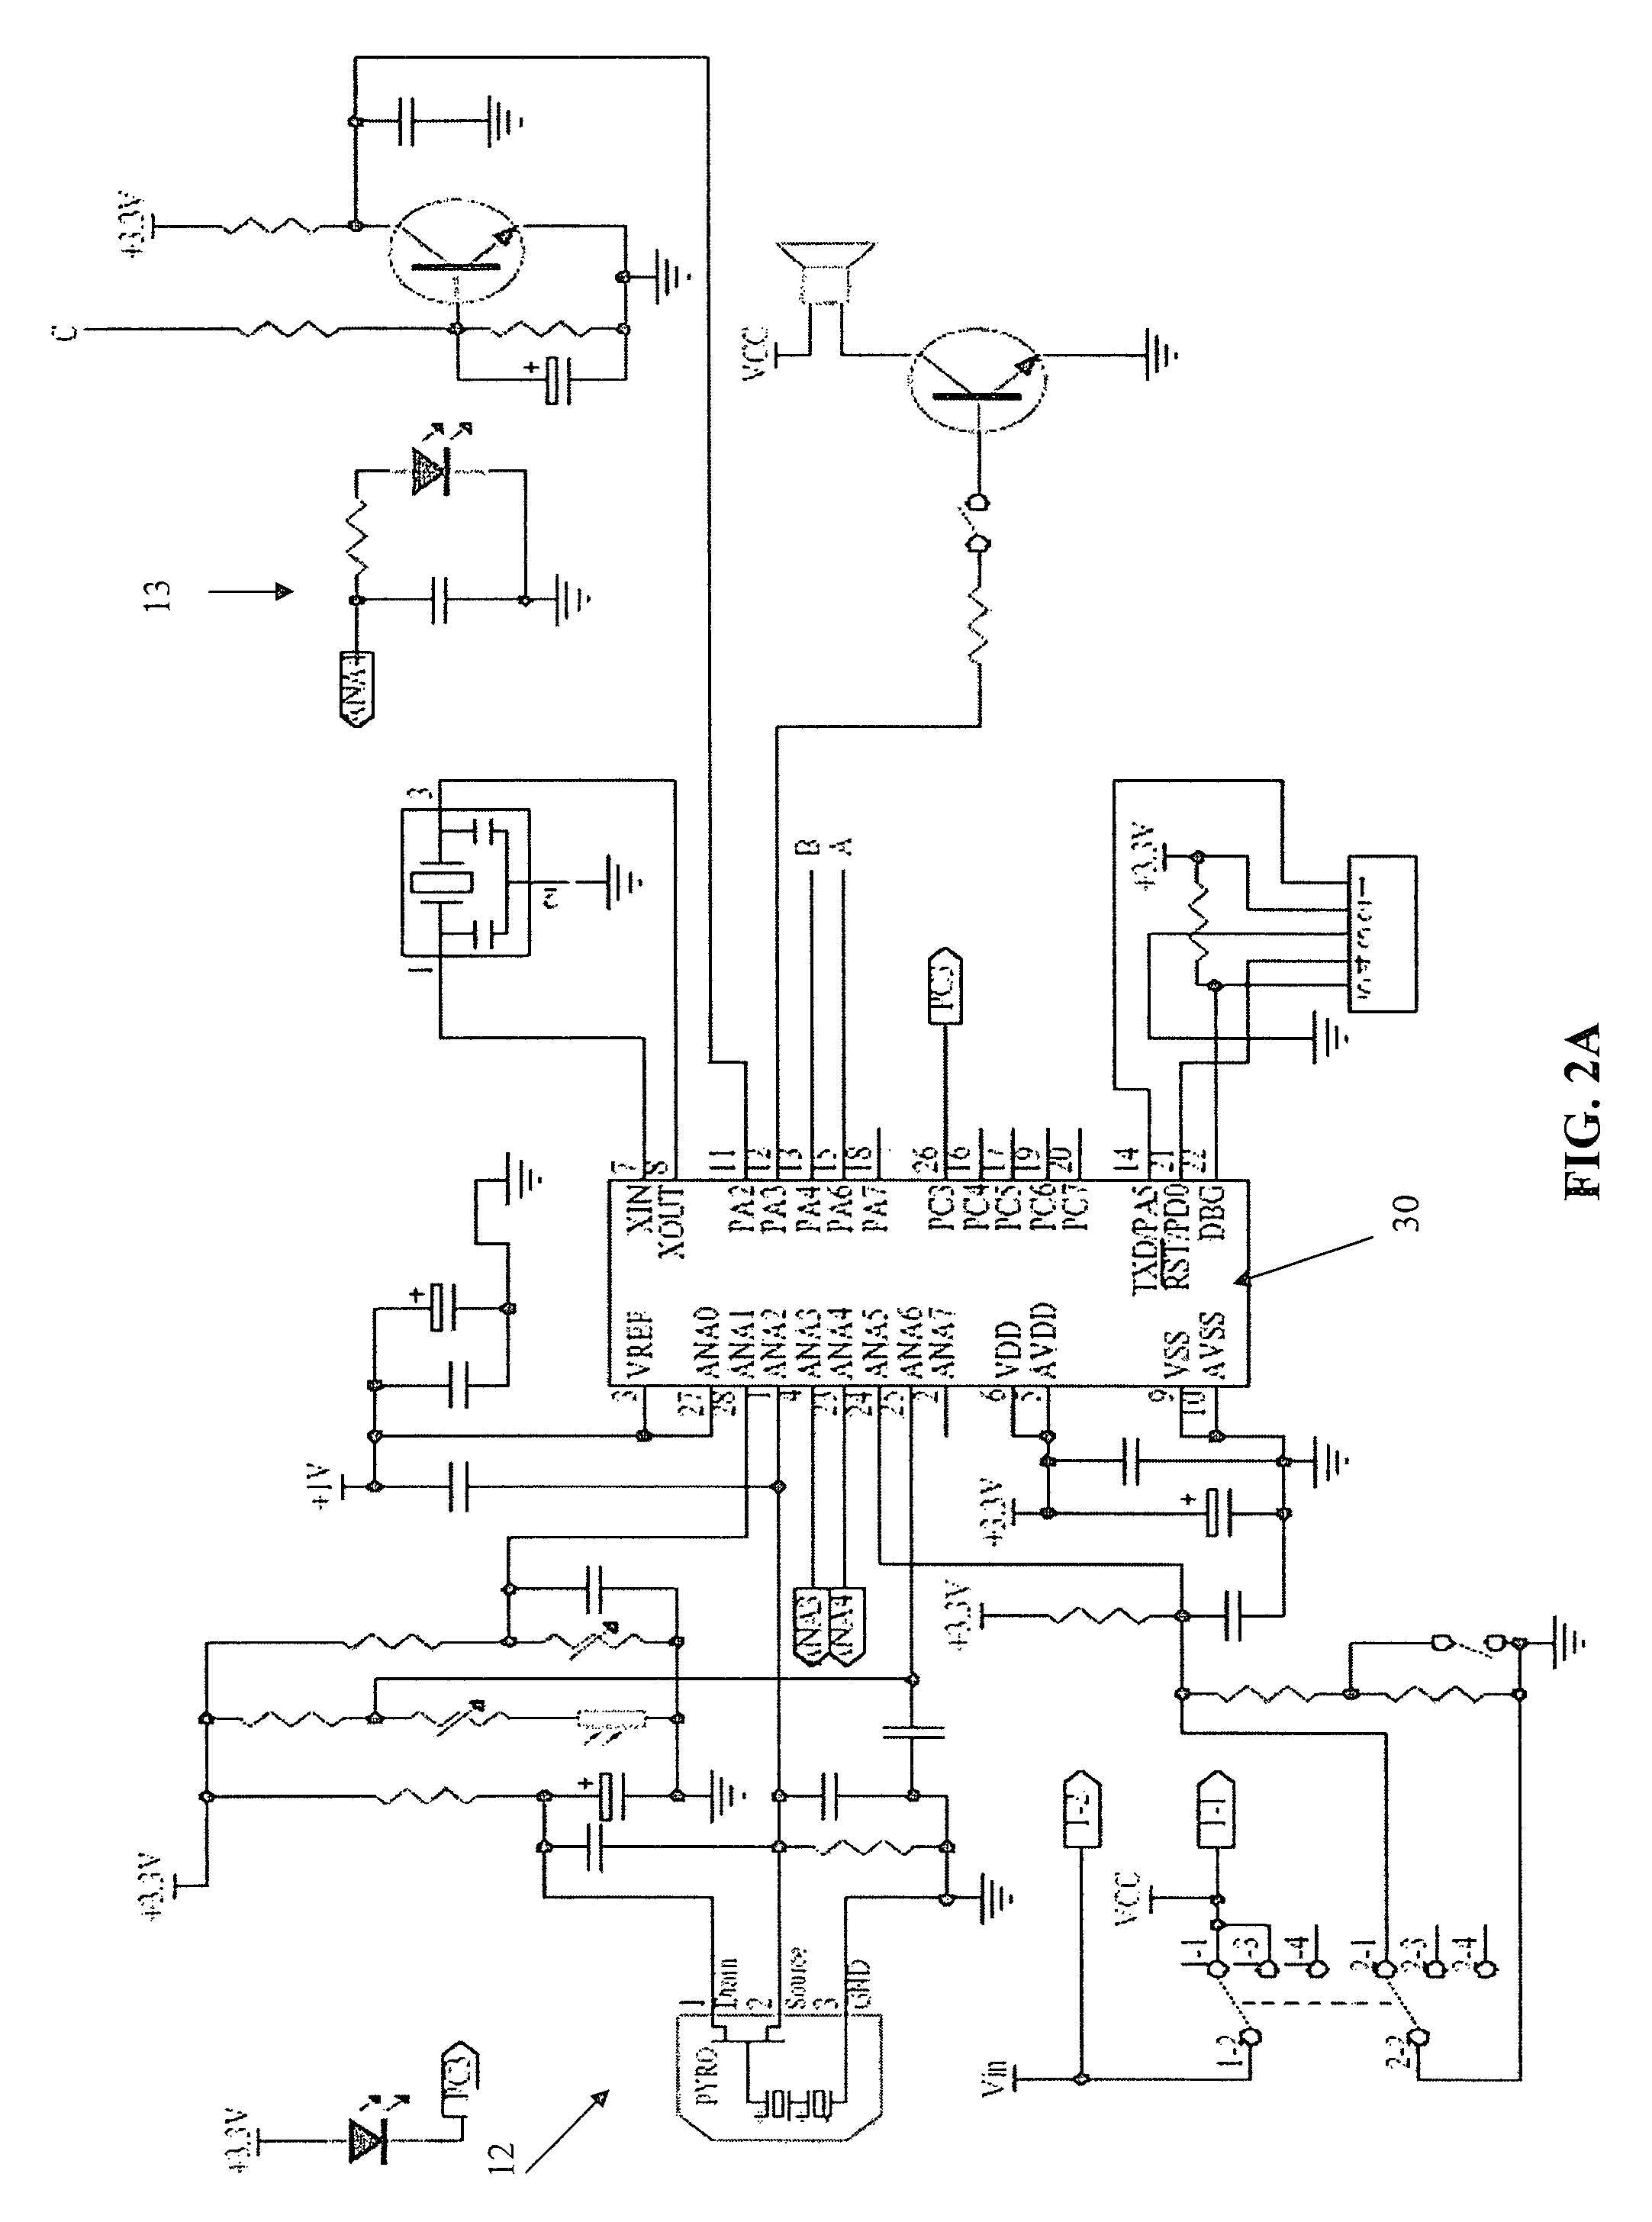 Process and system of power saving lighting